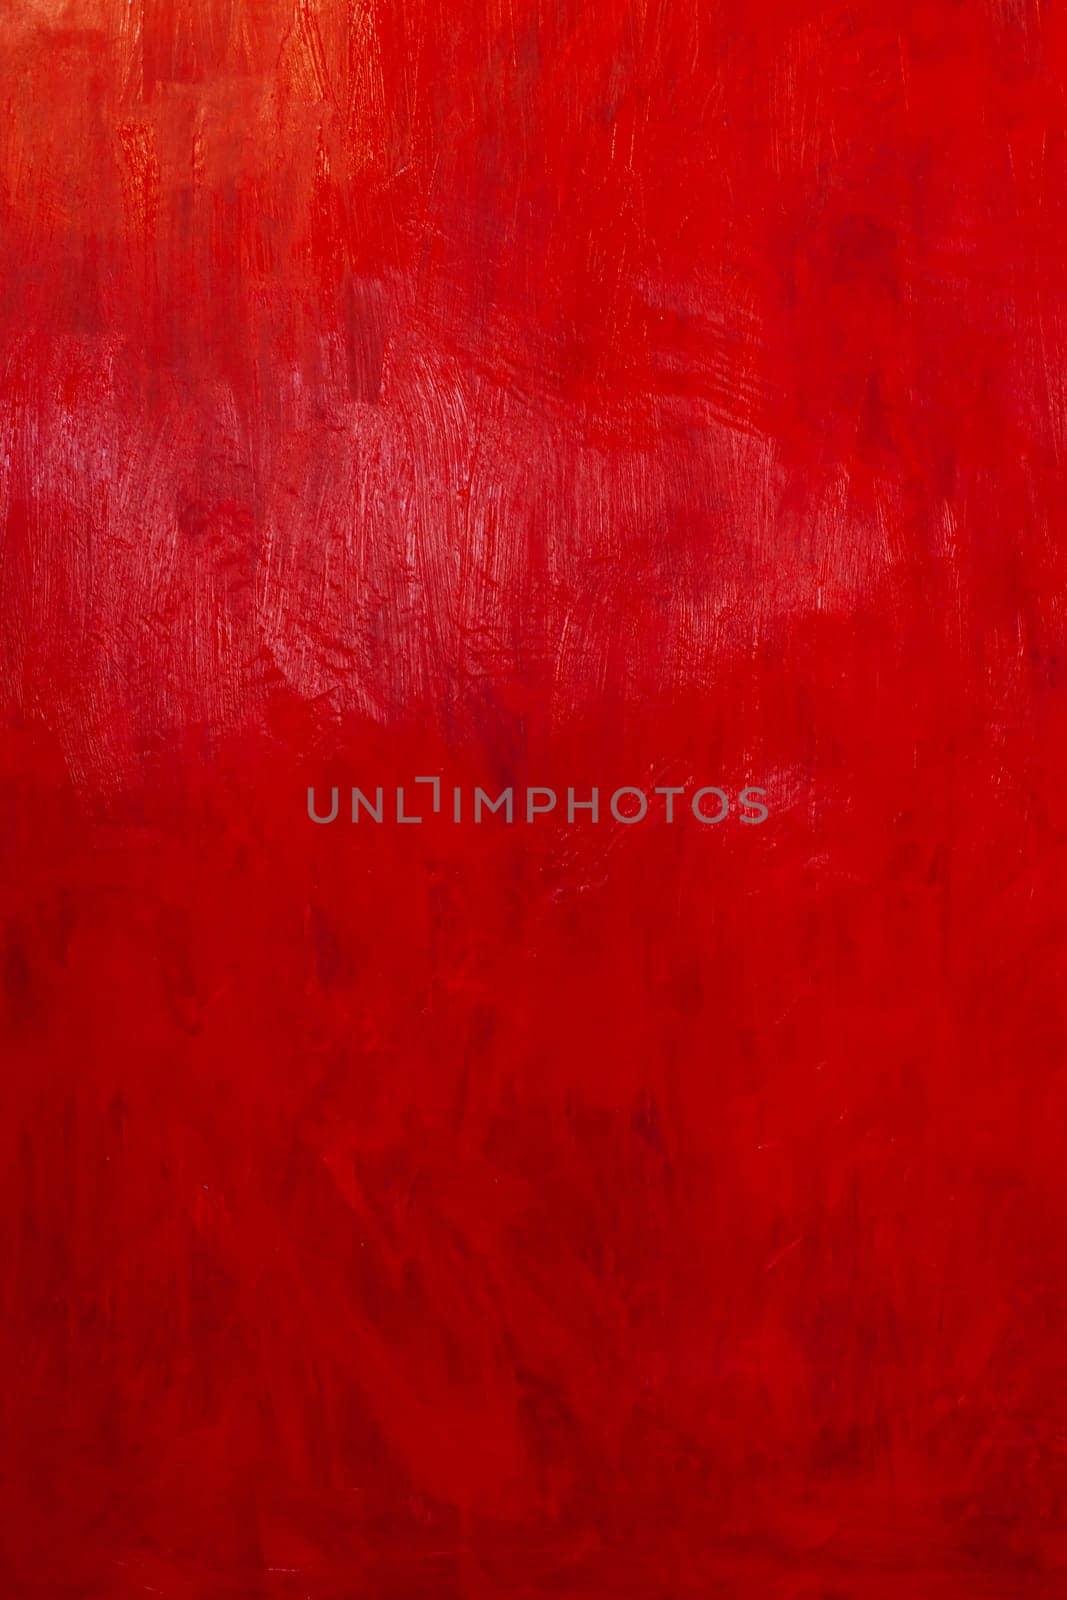 brushing red paint texture background